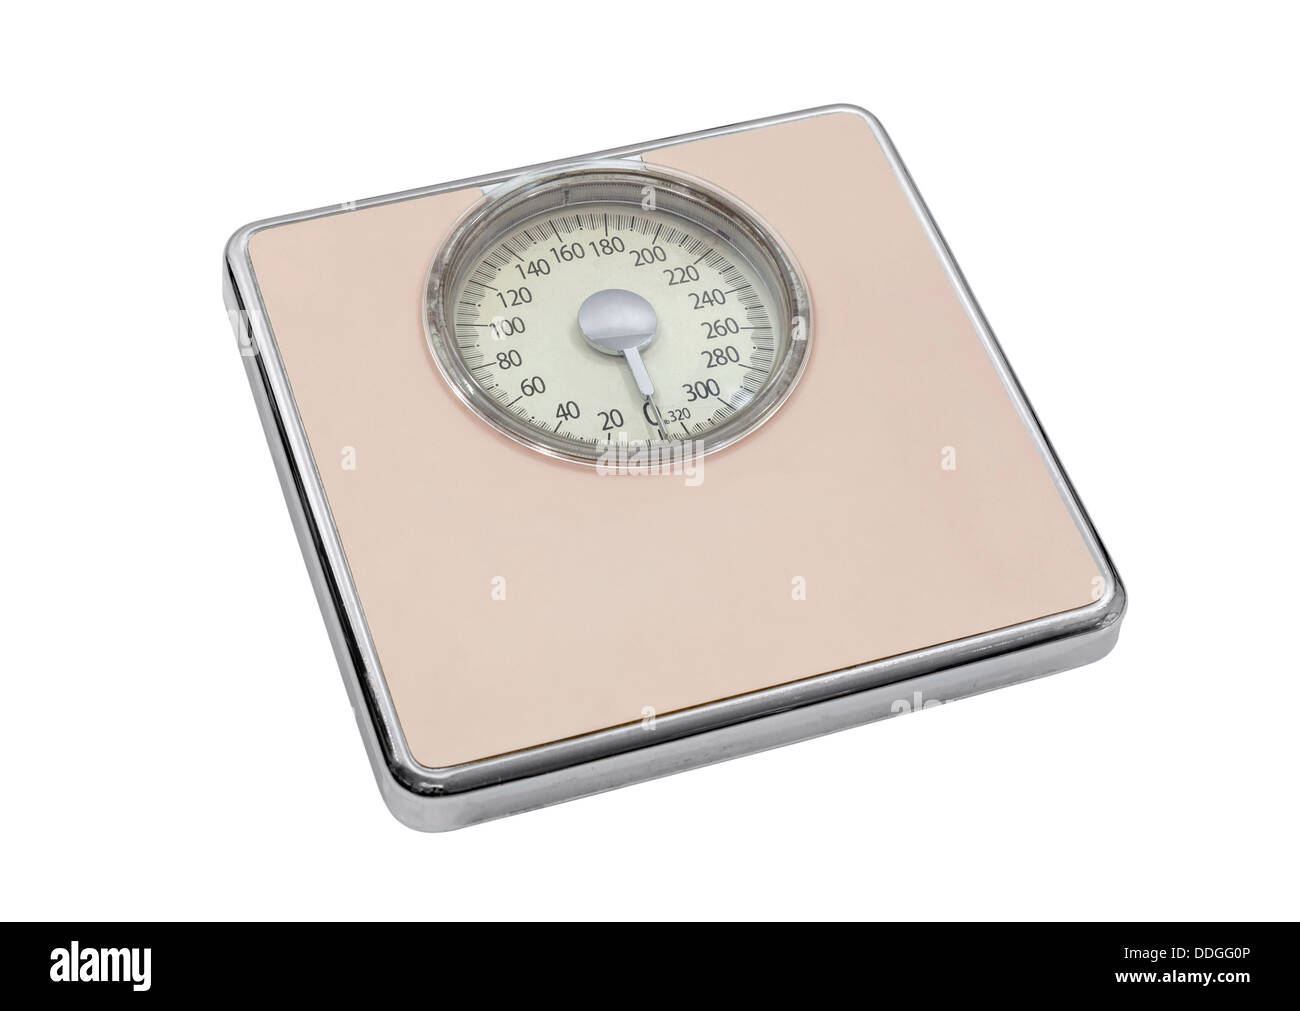 https://c8.alamy.com/comp/DDGG0P/vintage-pink-bathroom-scale-isolated-with-clipping-path-DDGG0P.jpg